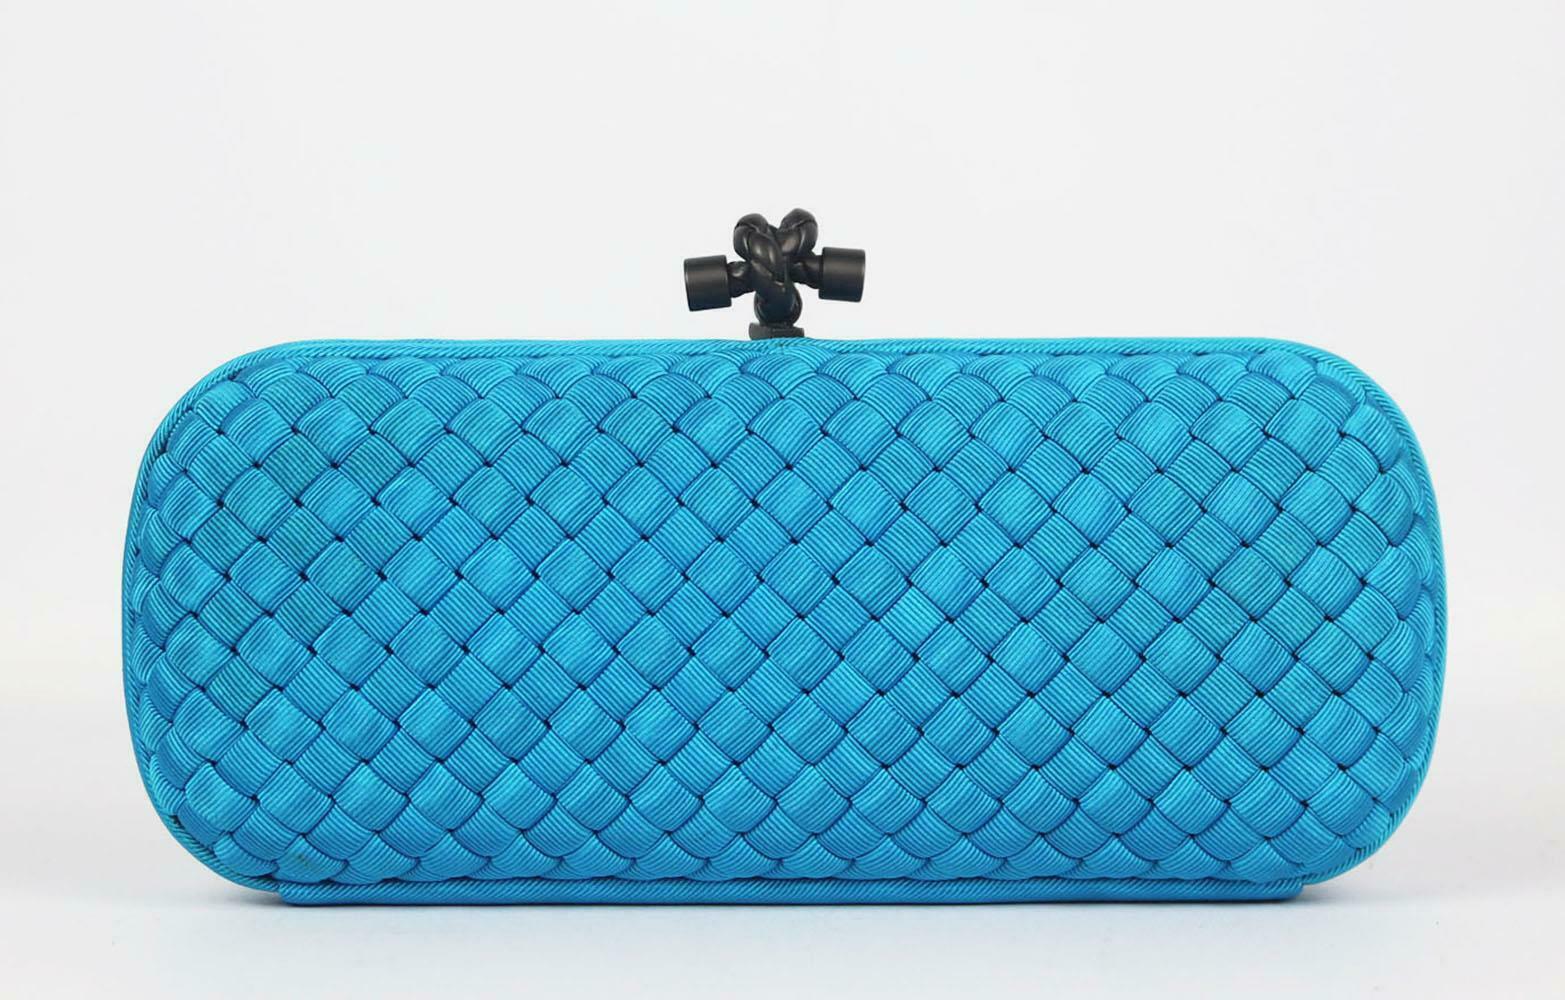 Bottega Veneta's 'Knot' clutch is such an enduring style, this version is woven from strips of lustrous faille silk using the label's signature intrecciato technique and beautifully finished with the brand's signature gunmetal knot. 
Blue